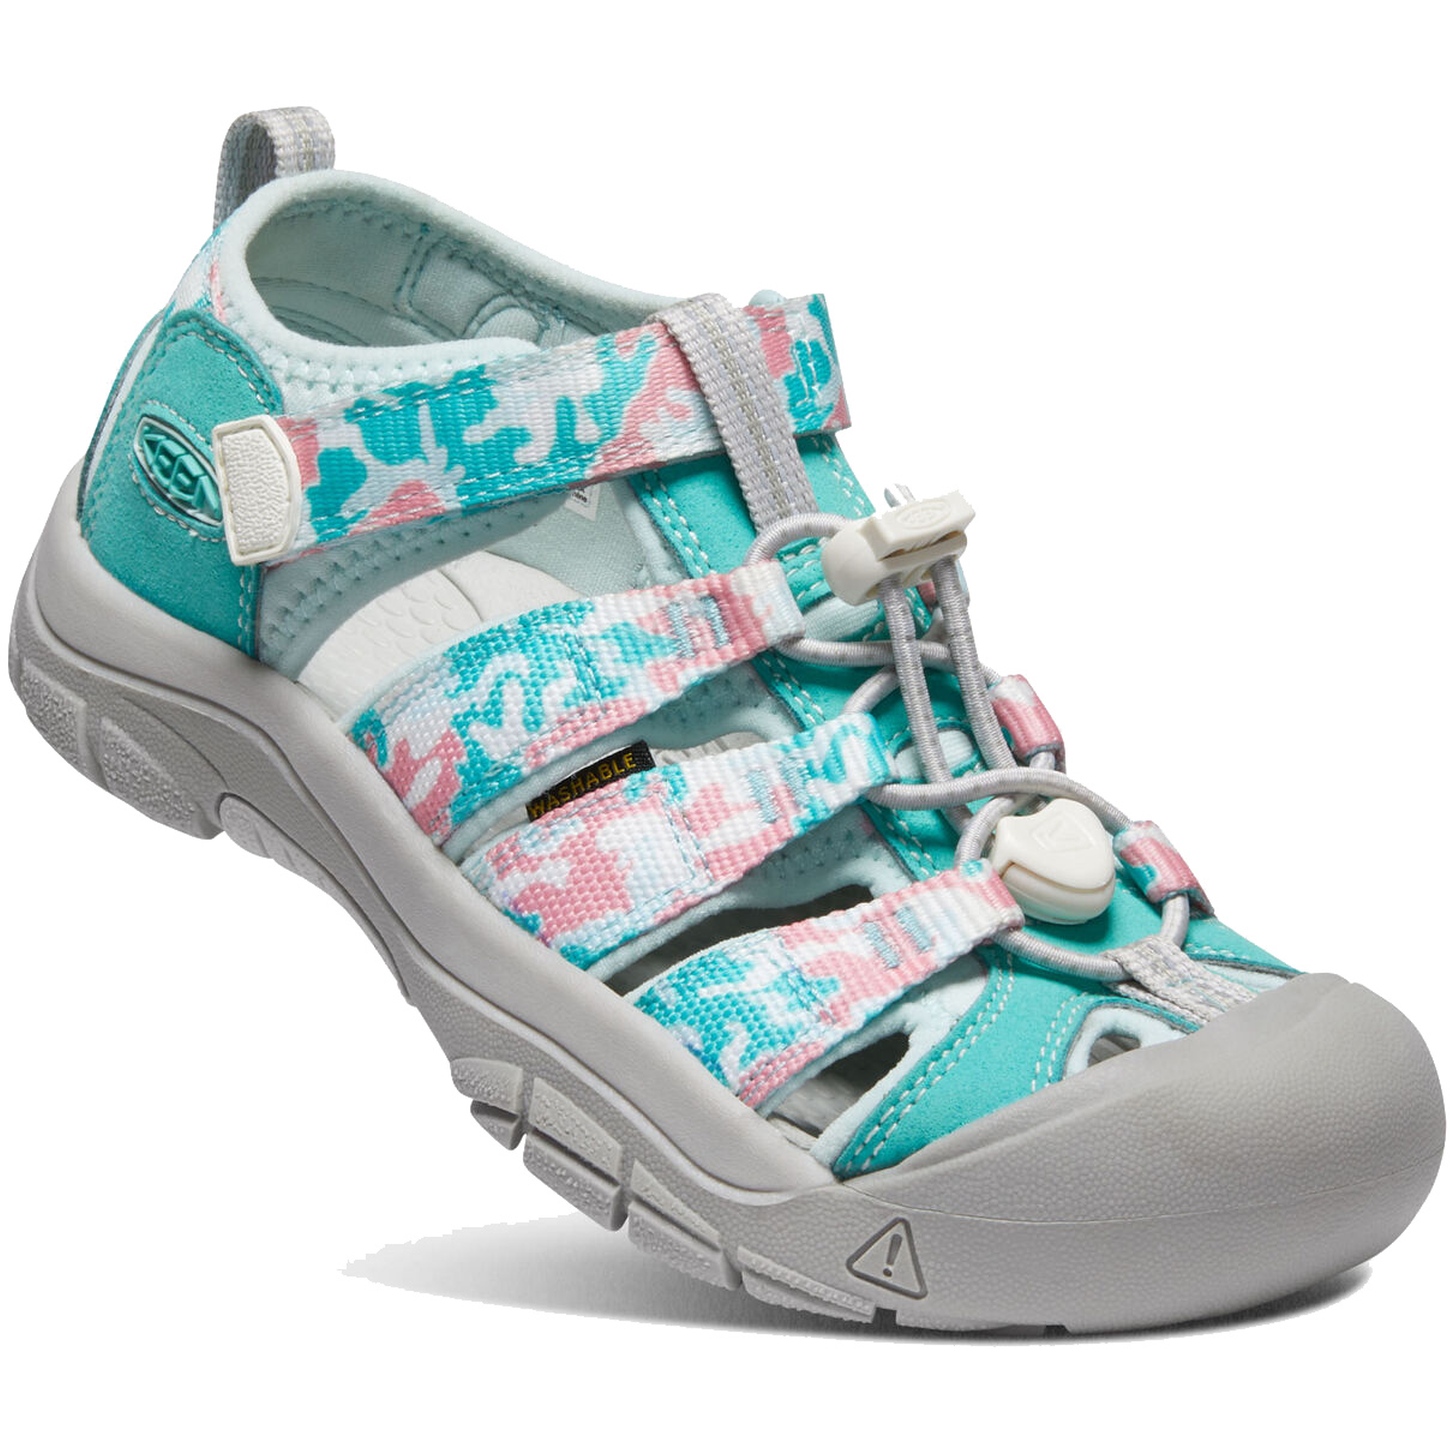 Picture of KEEN Newport H2 Sandals Kids - Camo / Pink Icing (Size 32-39)